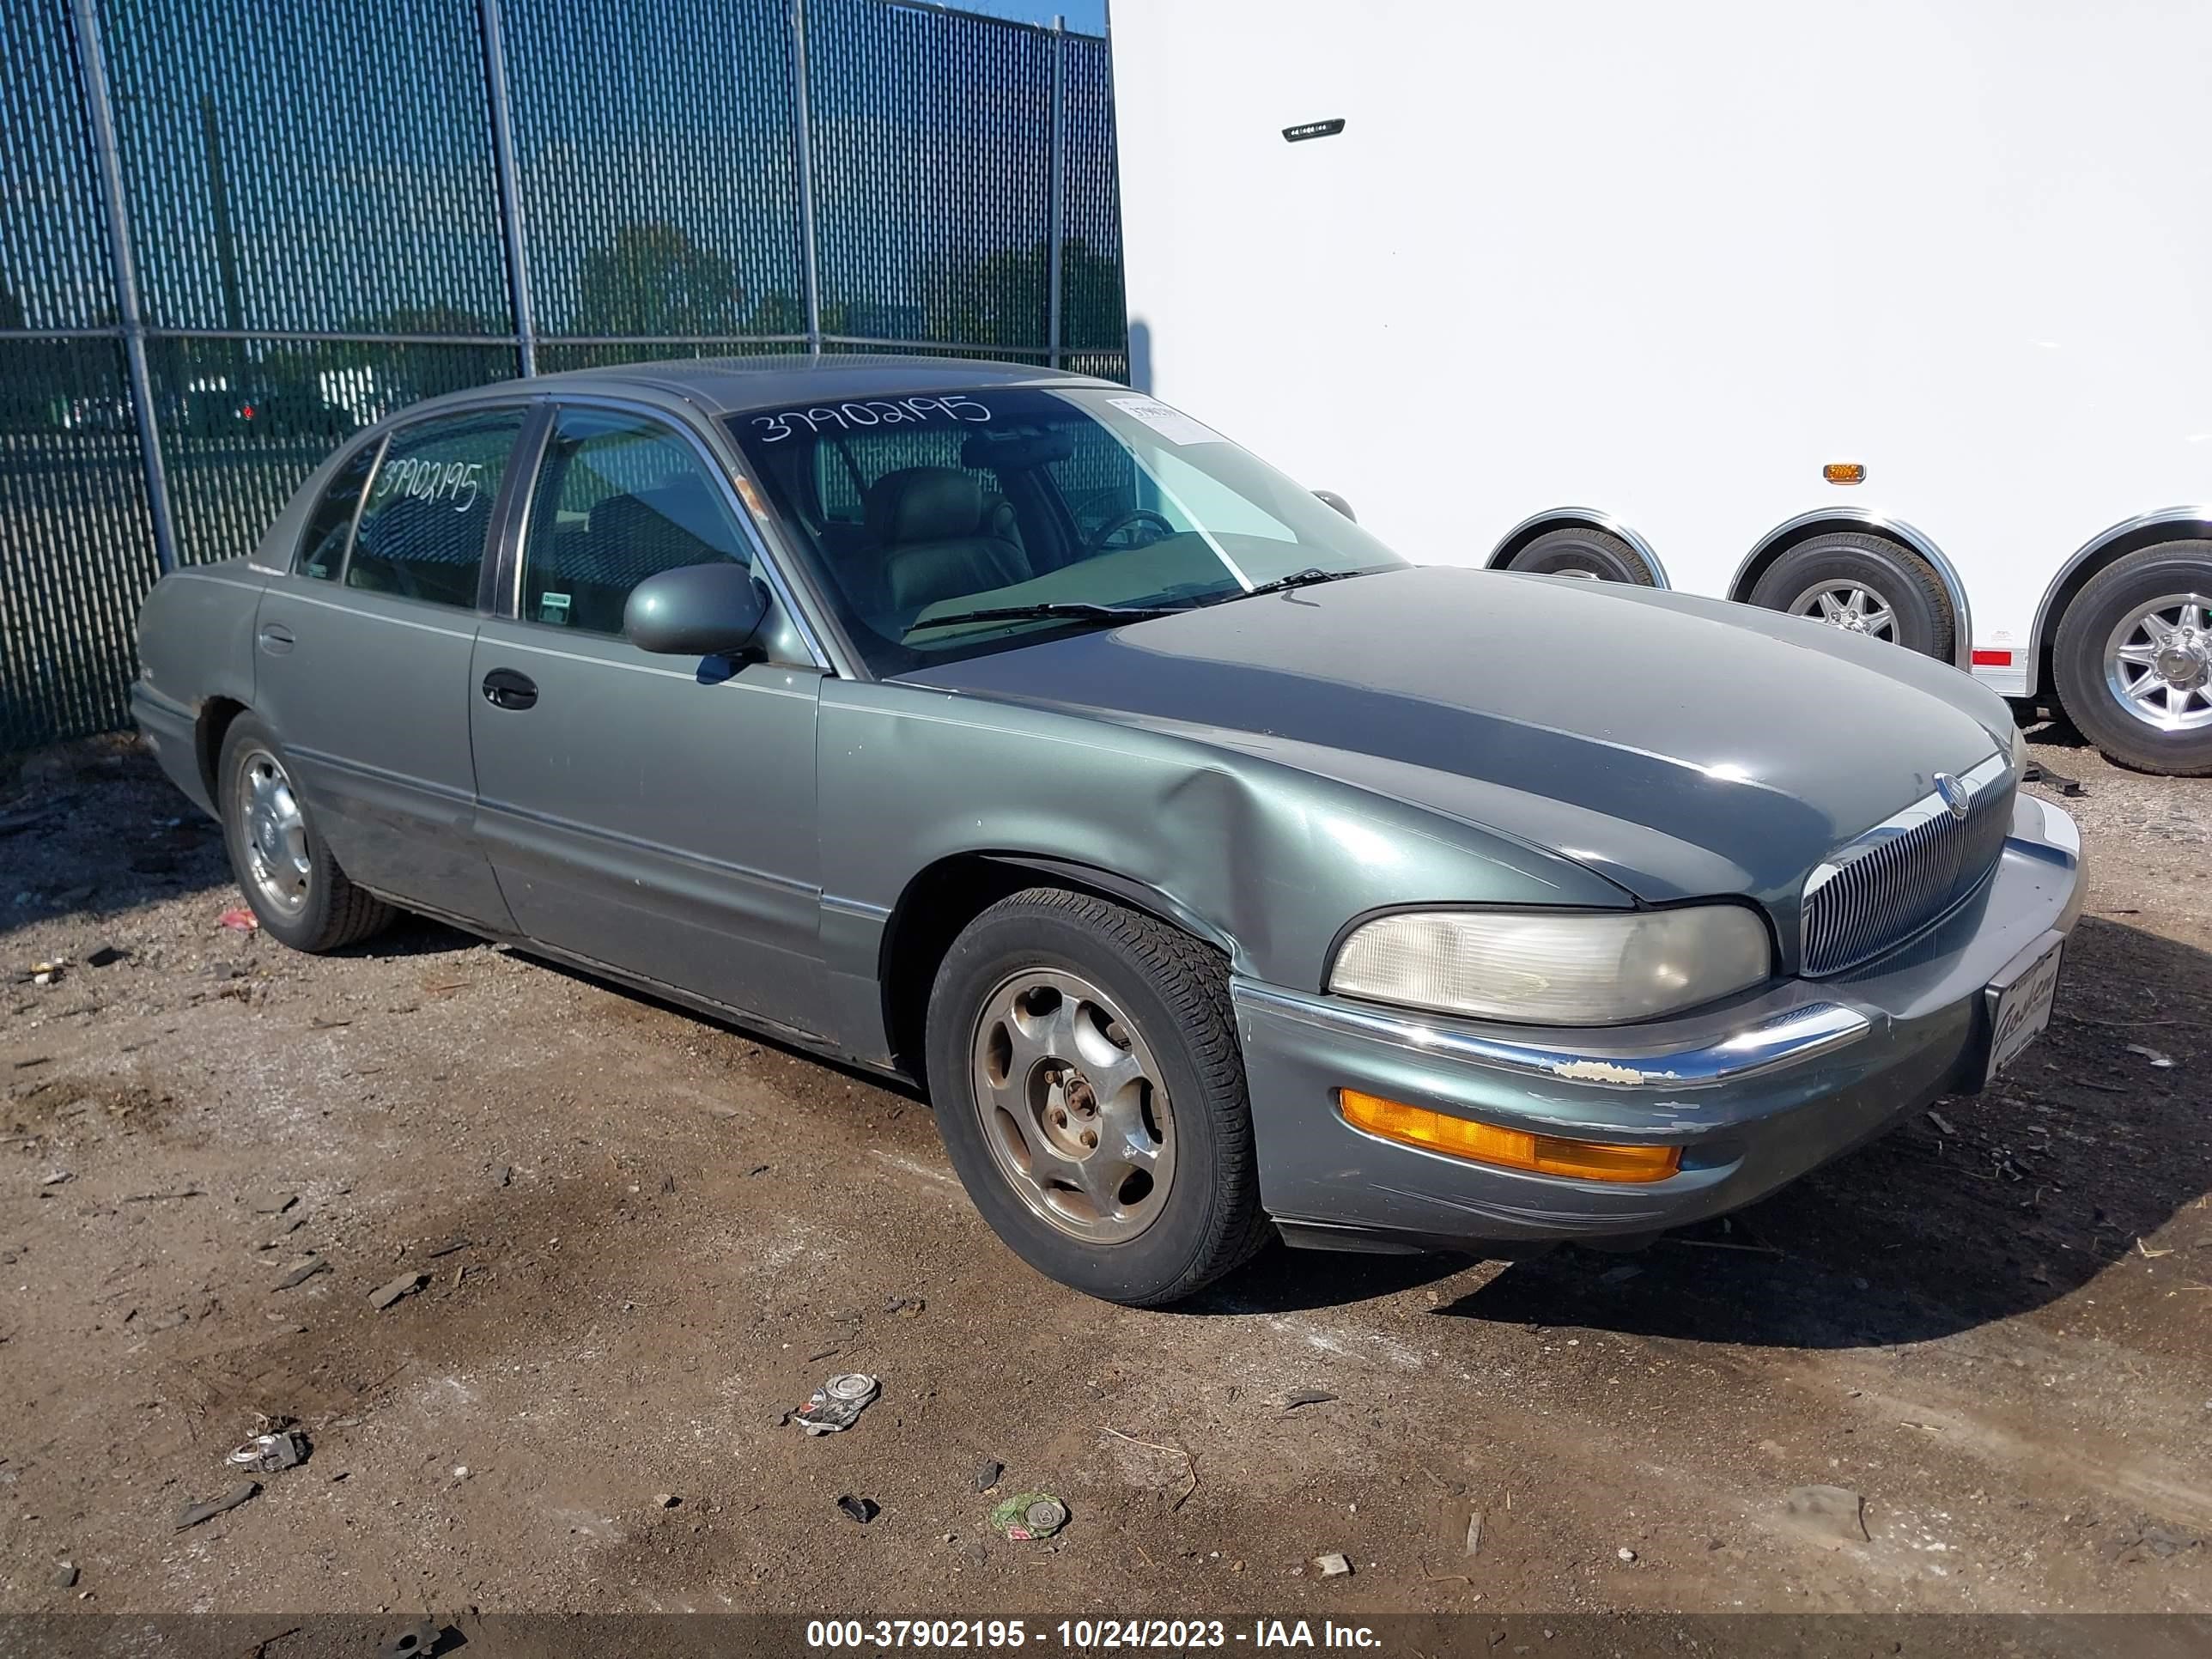 vin: 1G4CU521XW4645448 1G4CU521XW4645448 1998 buick park avenue 3800 for Sale in 46619, 3202 W Sample St, South Bend, USA